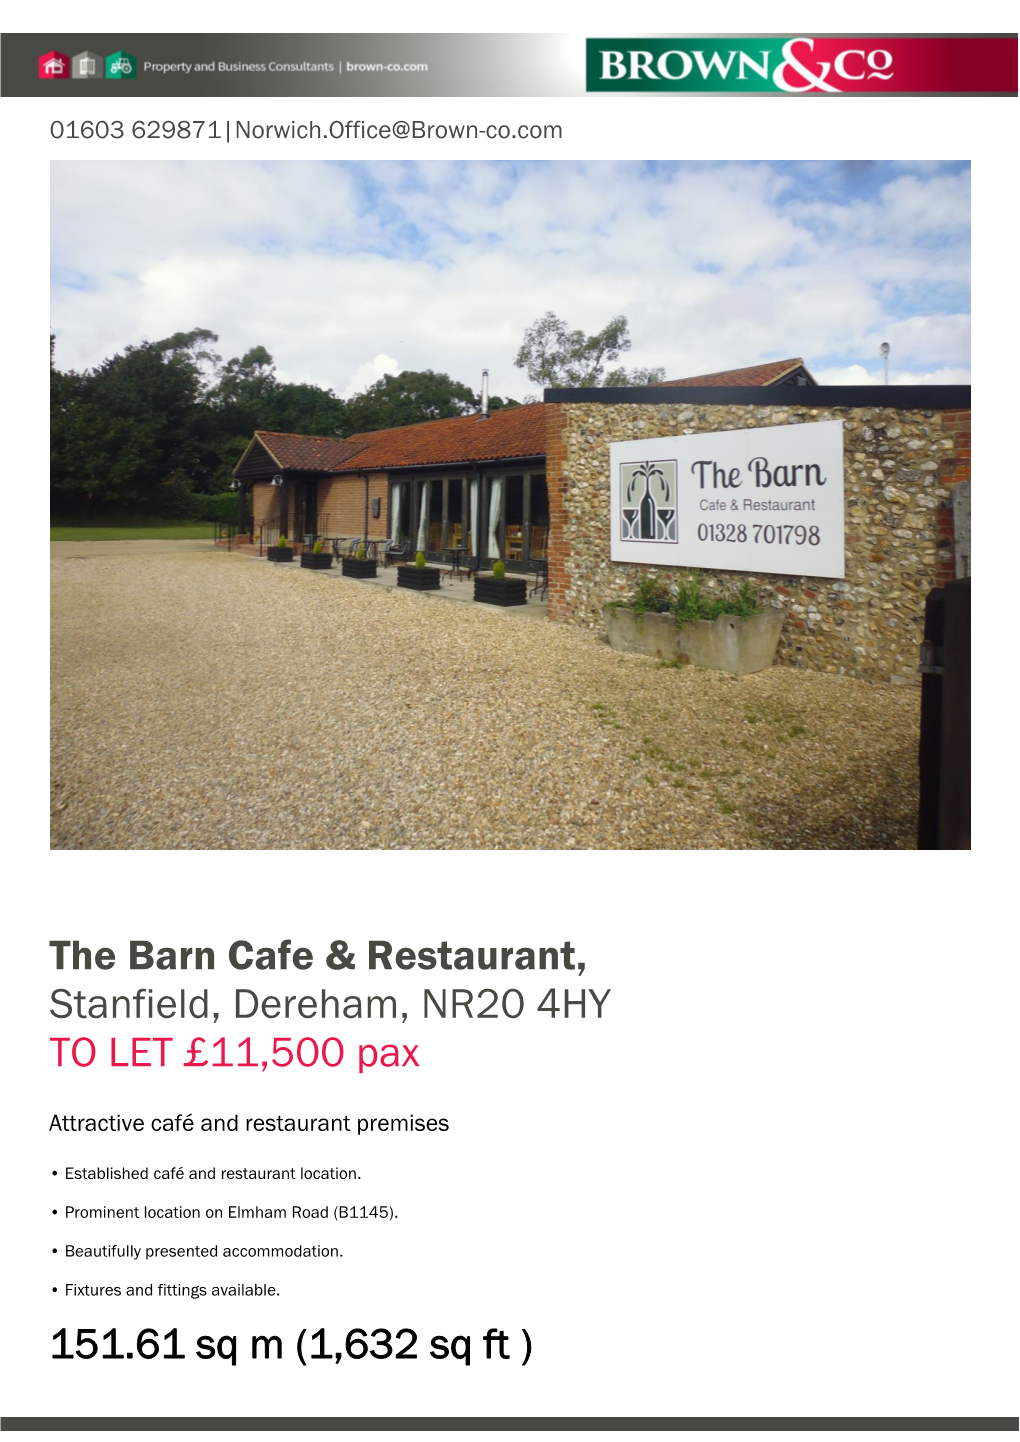 The Barn Cafe & Restaurant, Stanfield, Dereham, NR20 4HY to LET £11500 Pax 151.61 Sq M